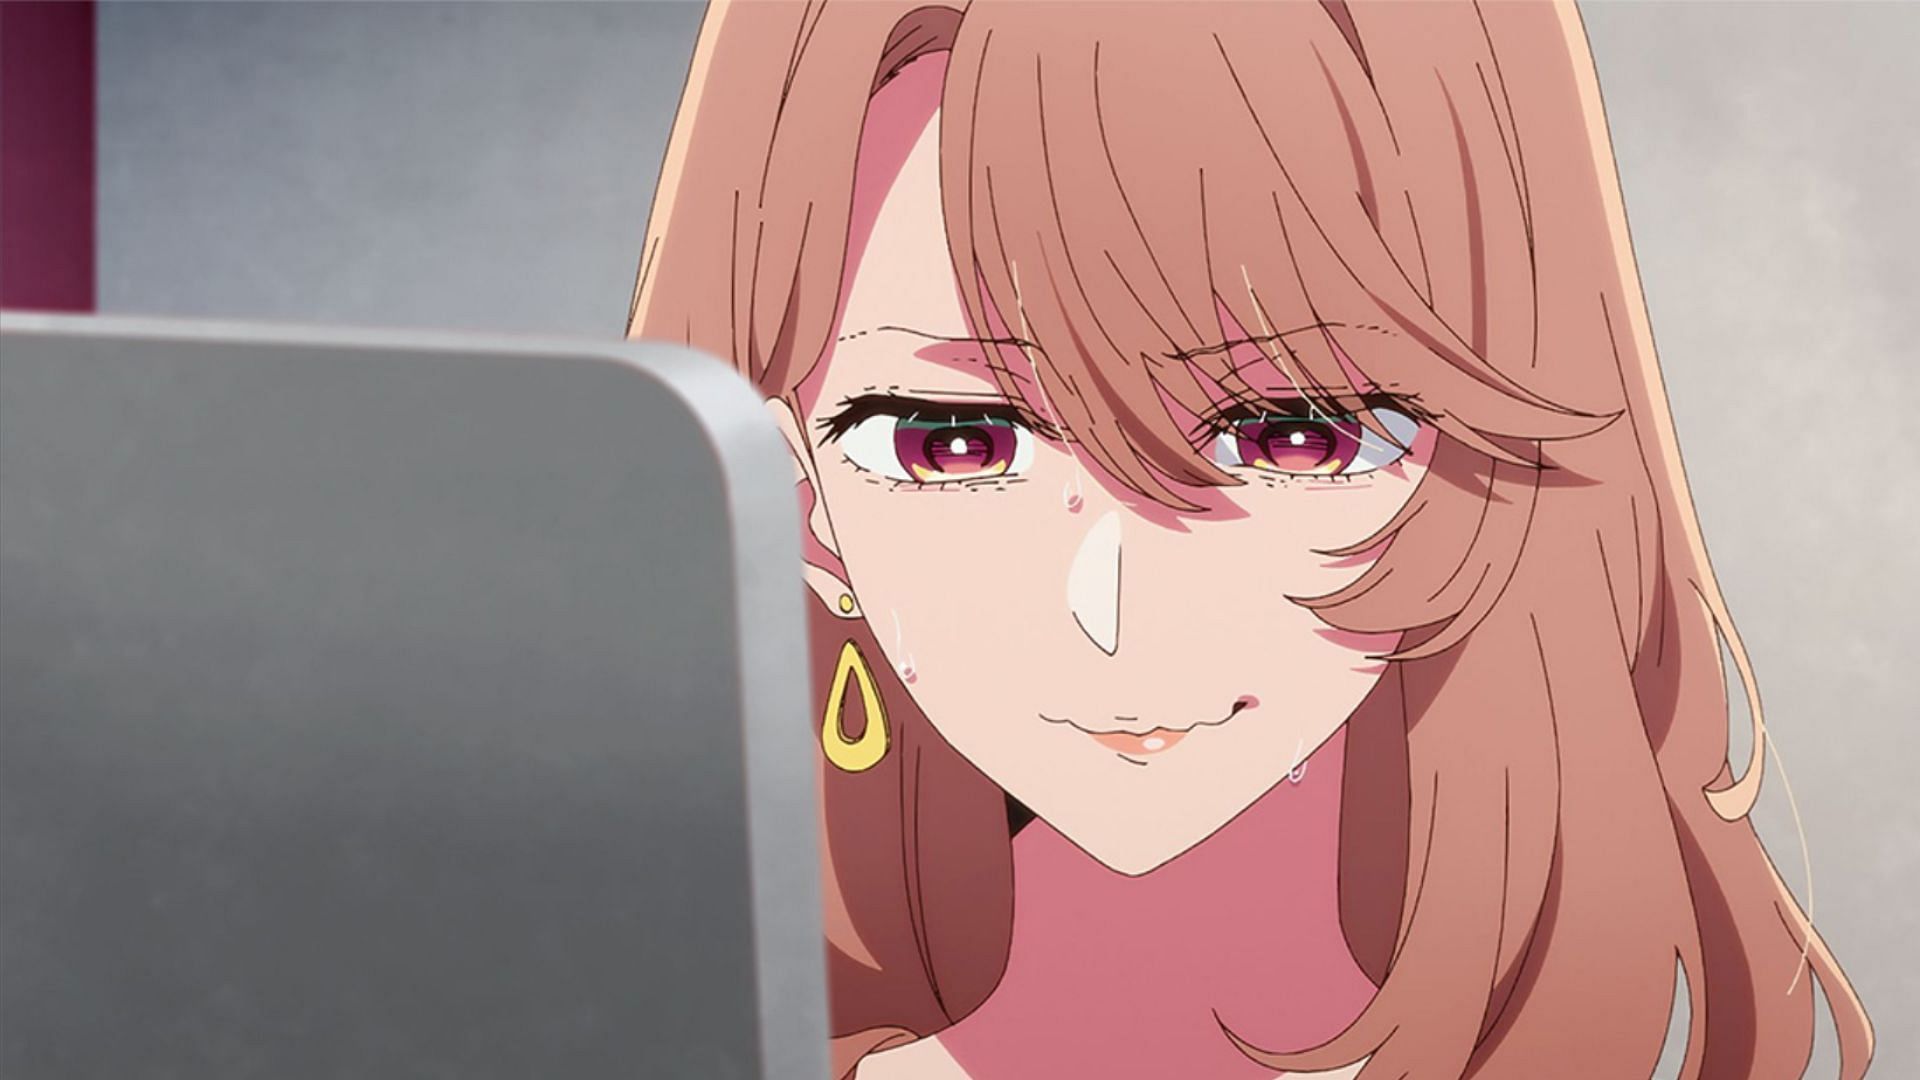 Oshi no Ko chapter 124 initial spoilers: Kana reacts loudly to Ruby and  Aqua's newfound relationship